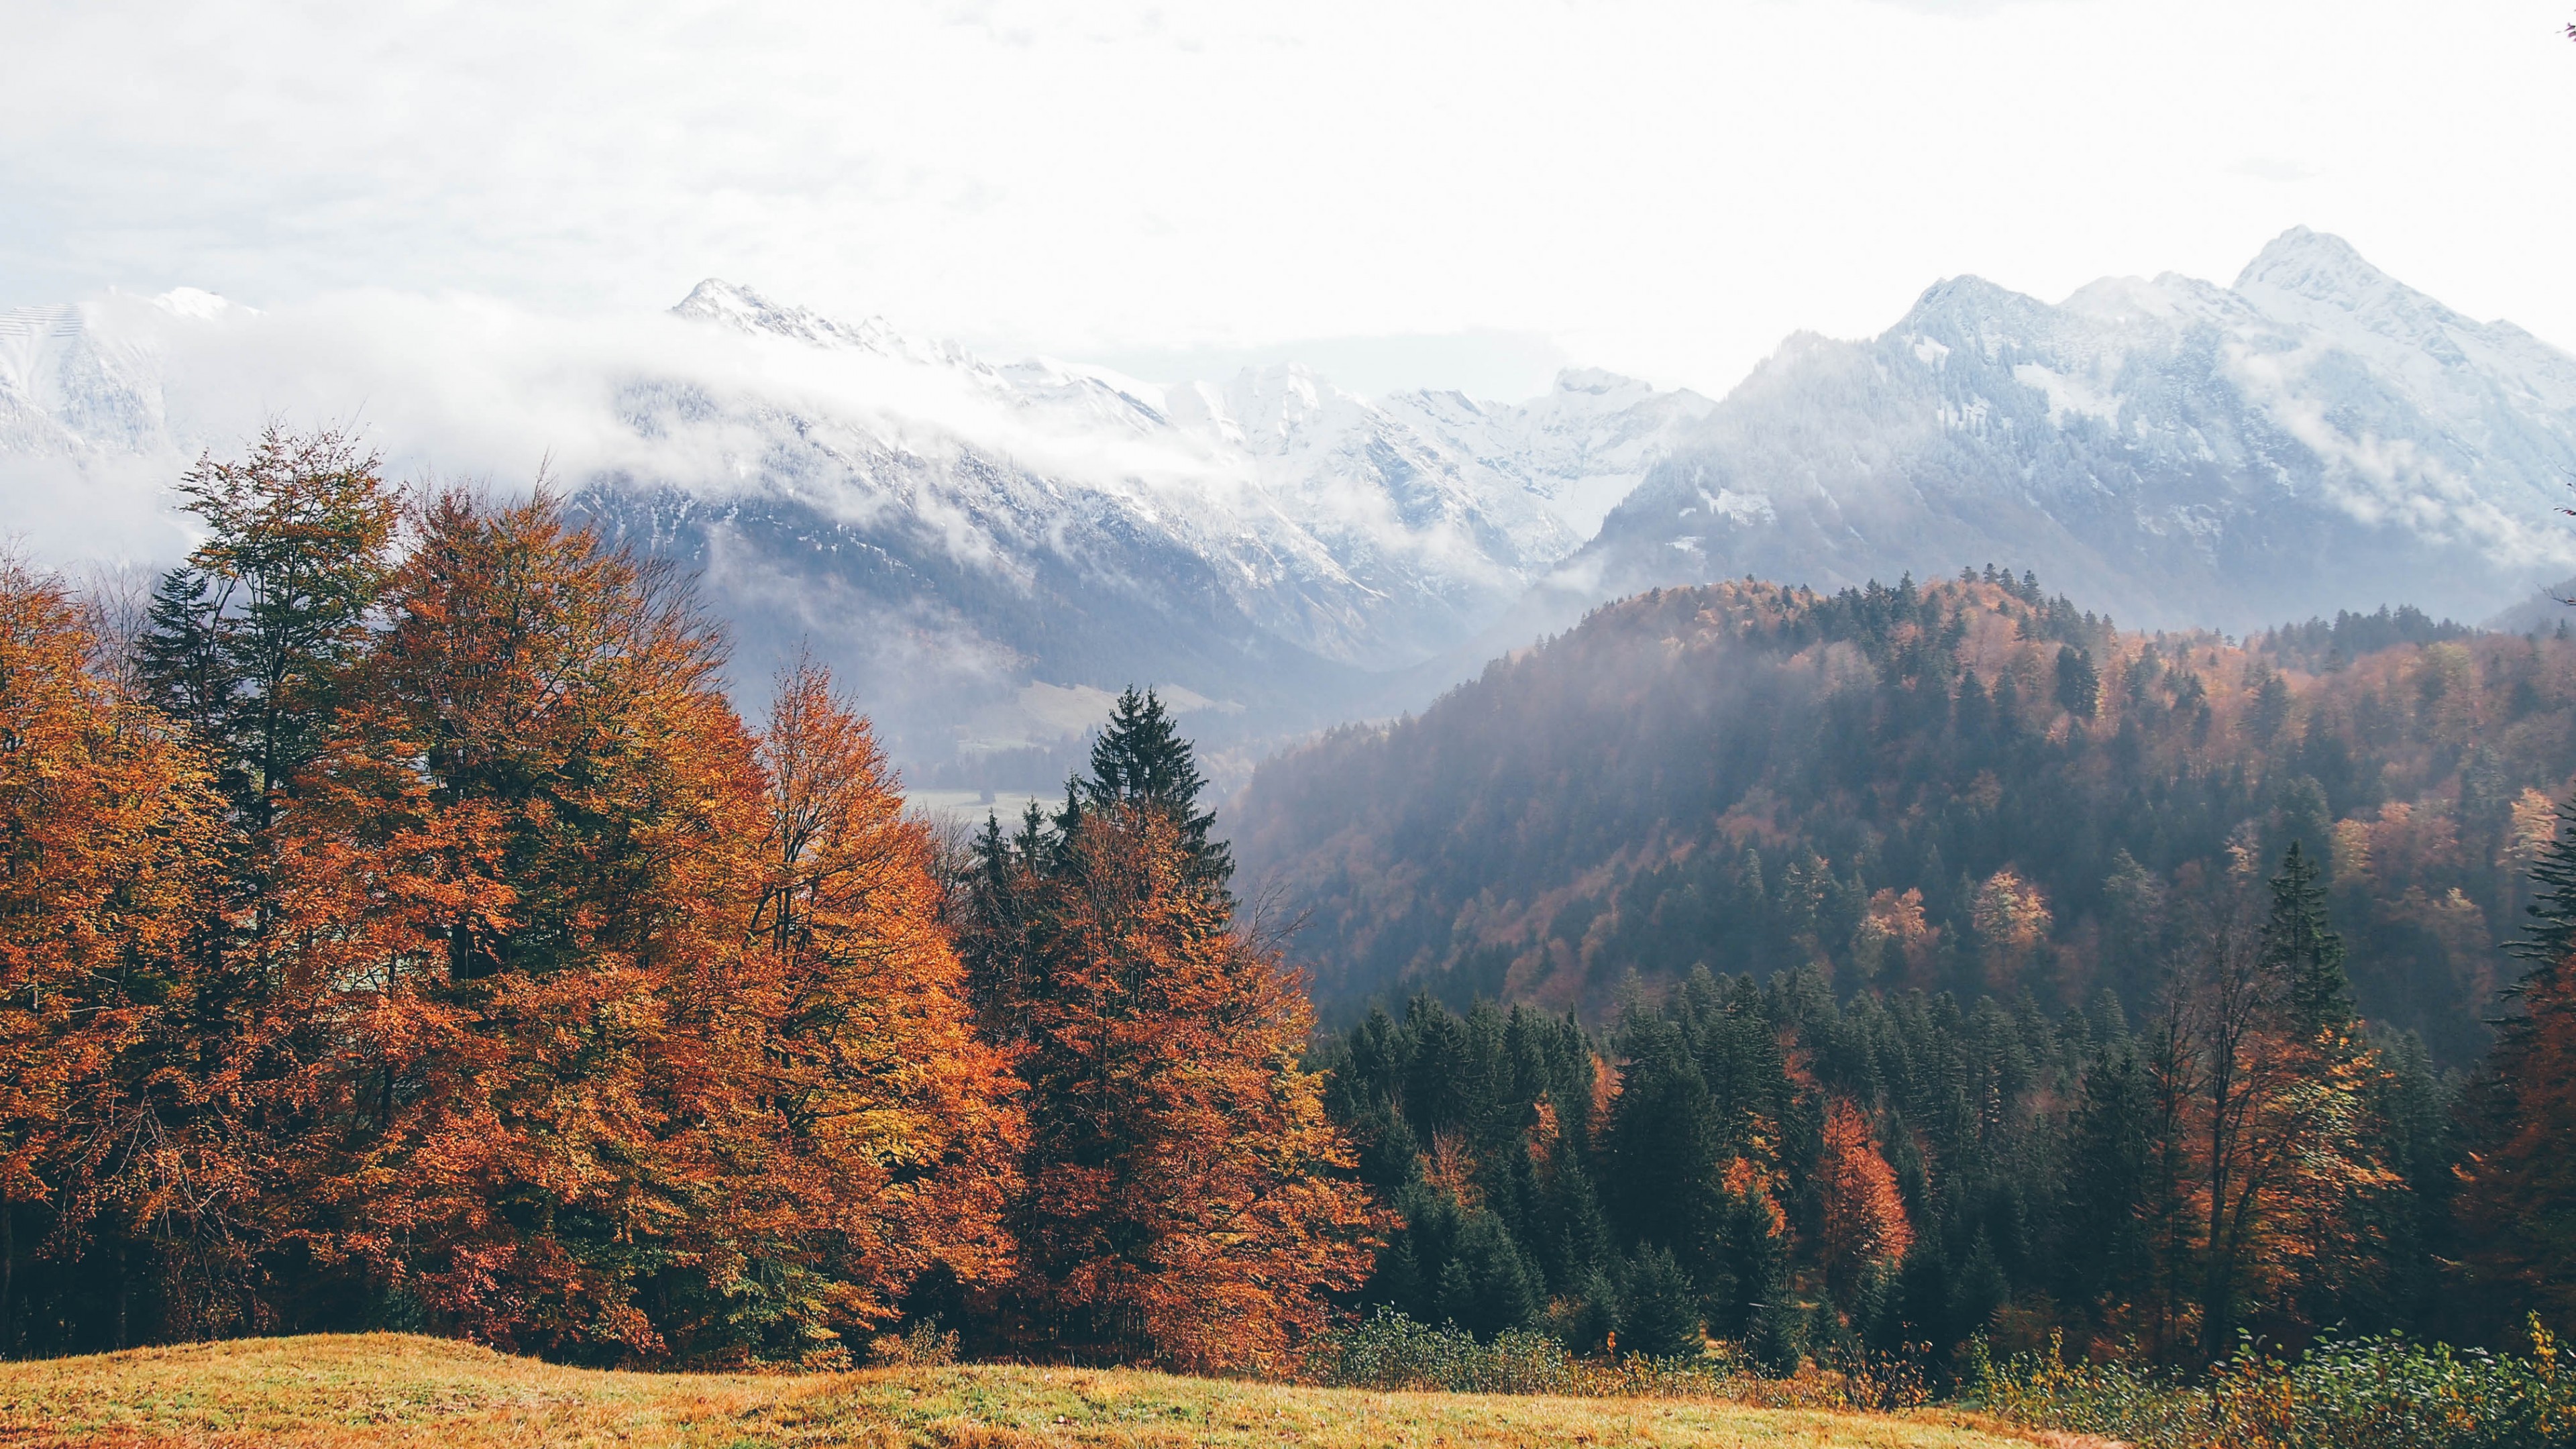 Wallpaper oberstdorf germany mountains autumn forest k nature